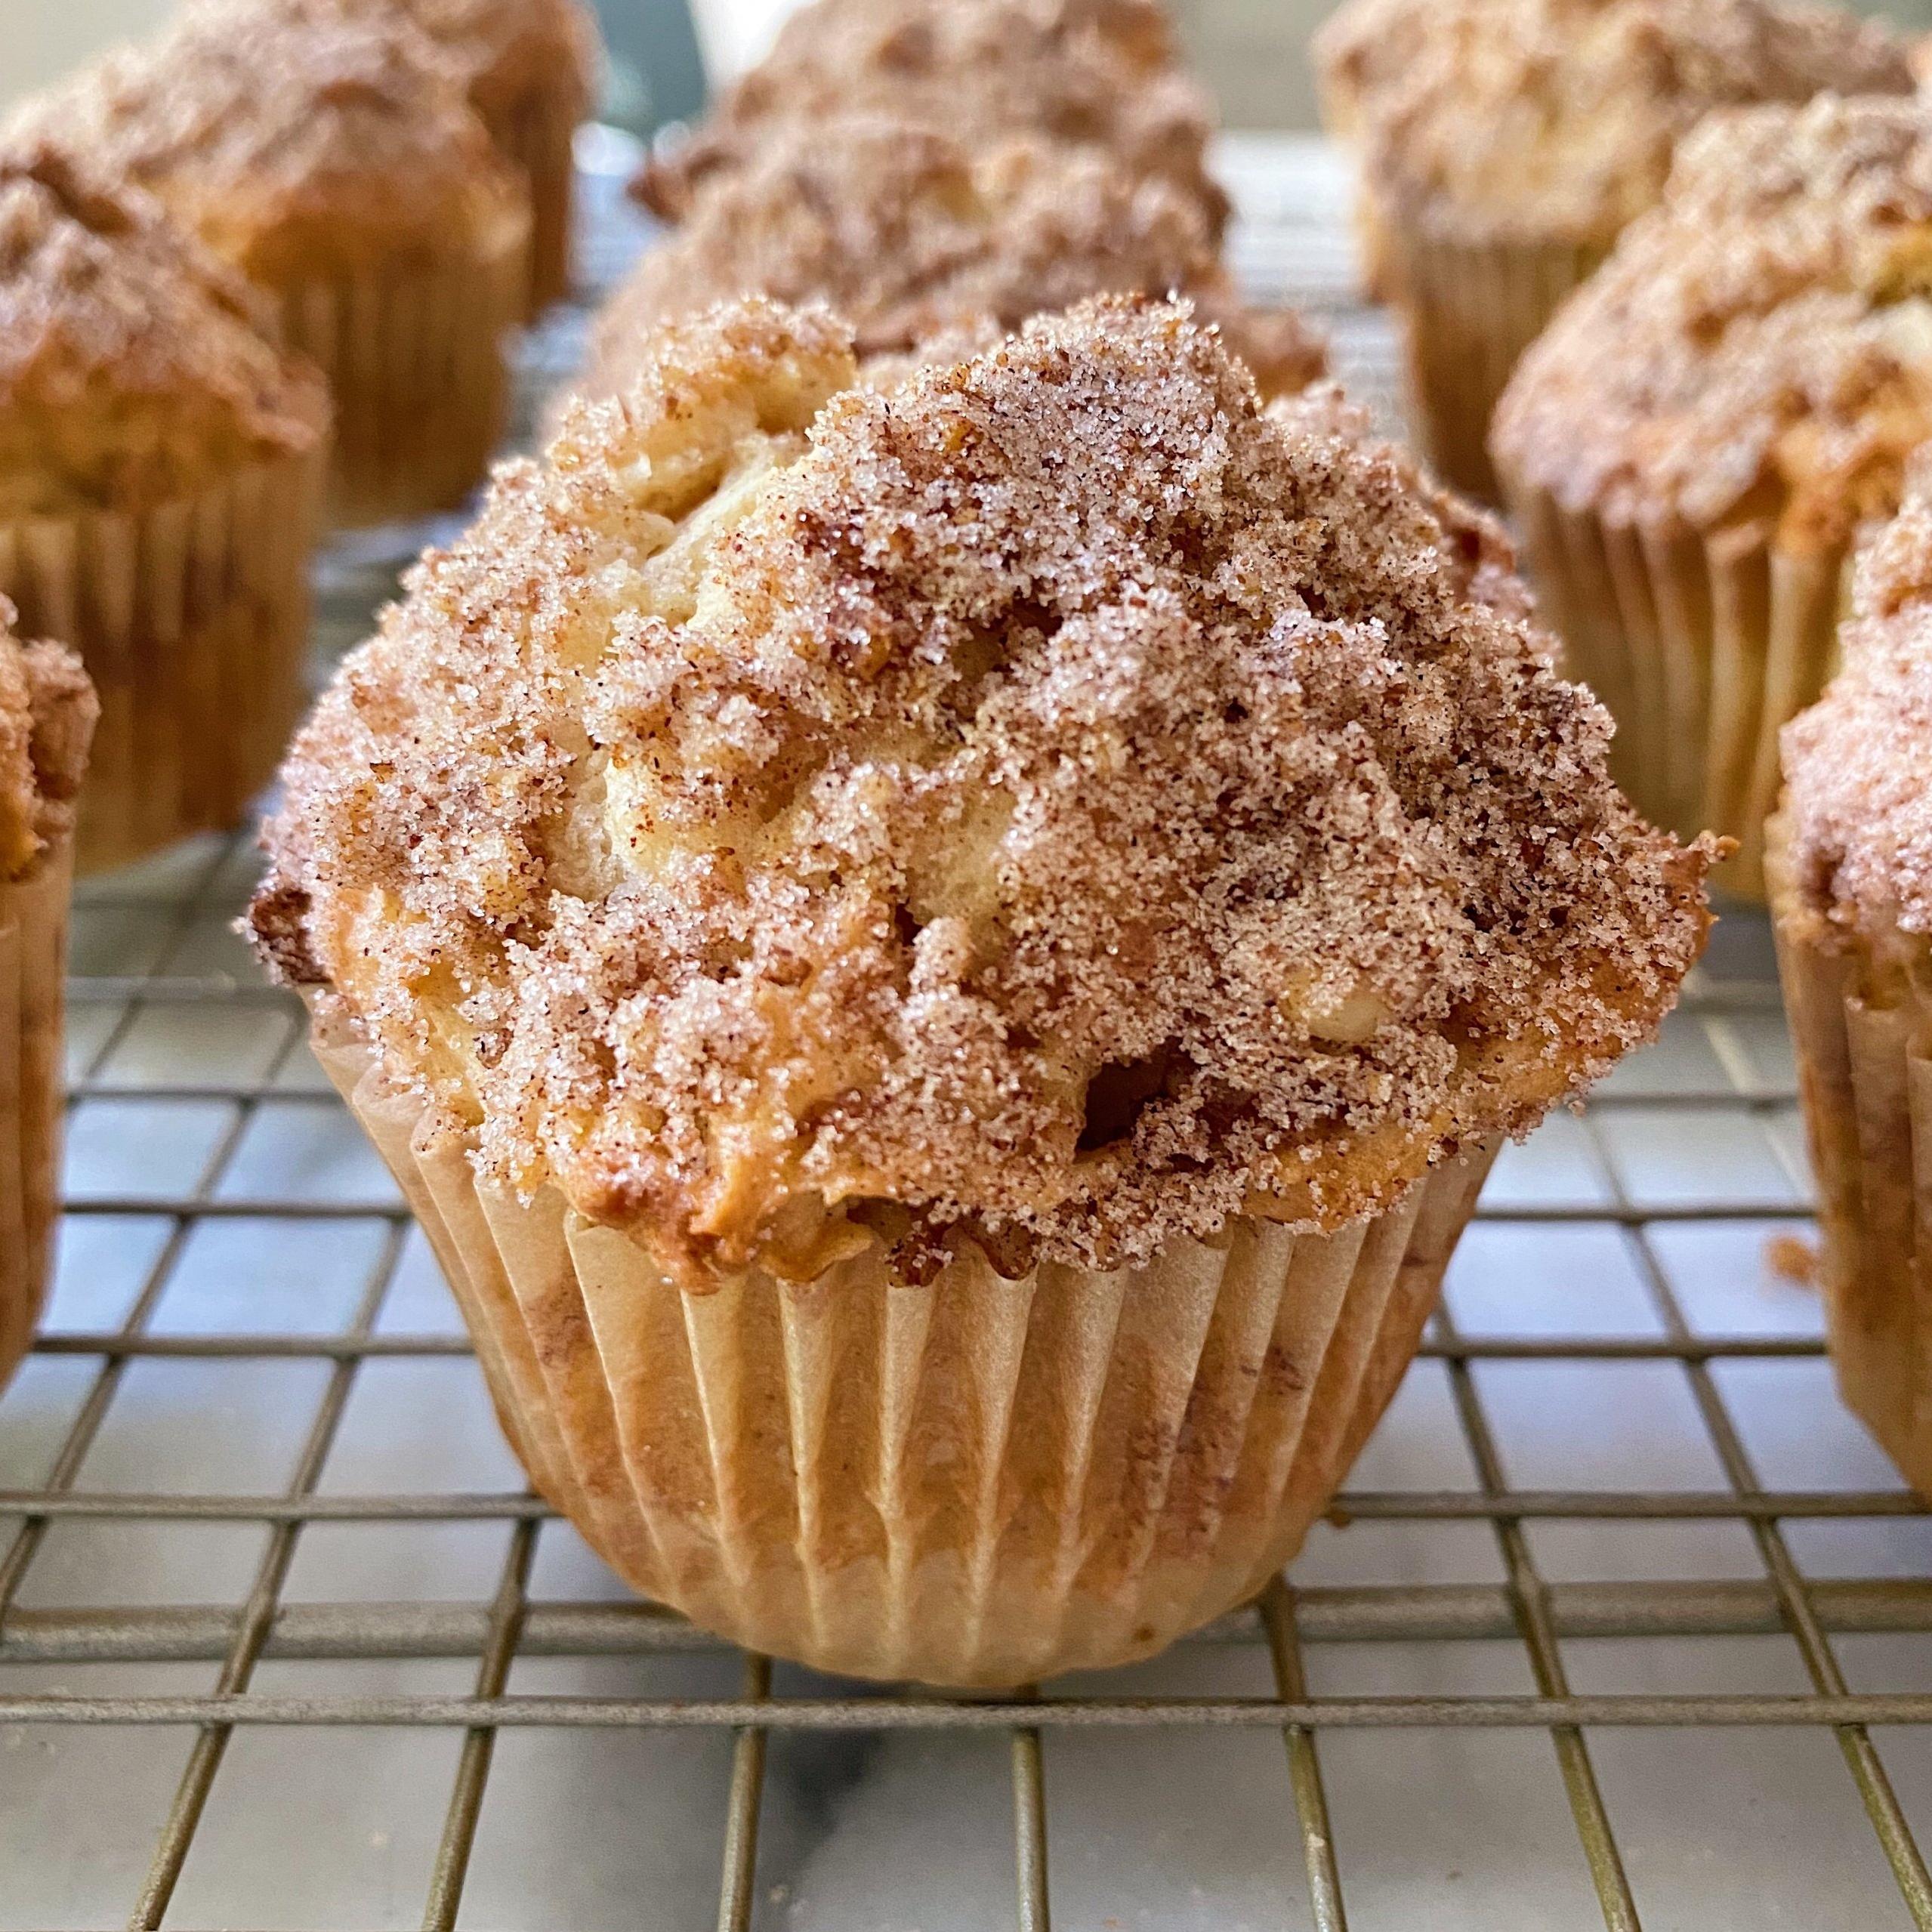  The gluten-free goodness of these muffins is irresistible